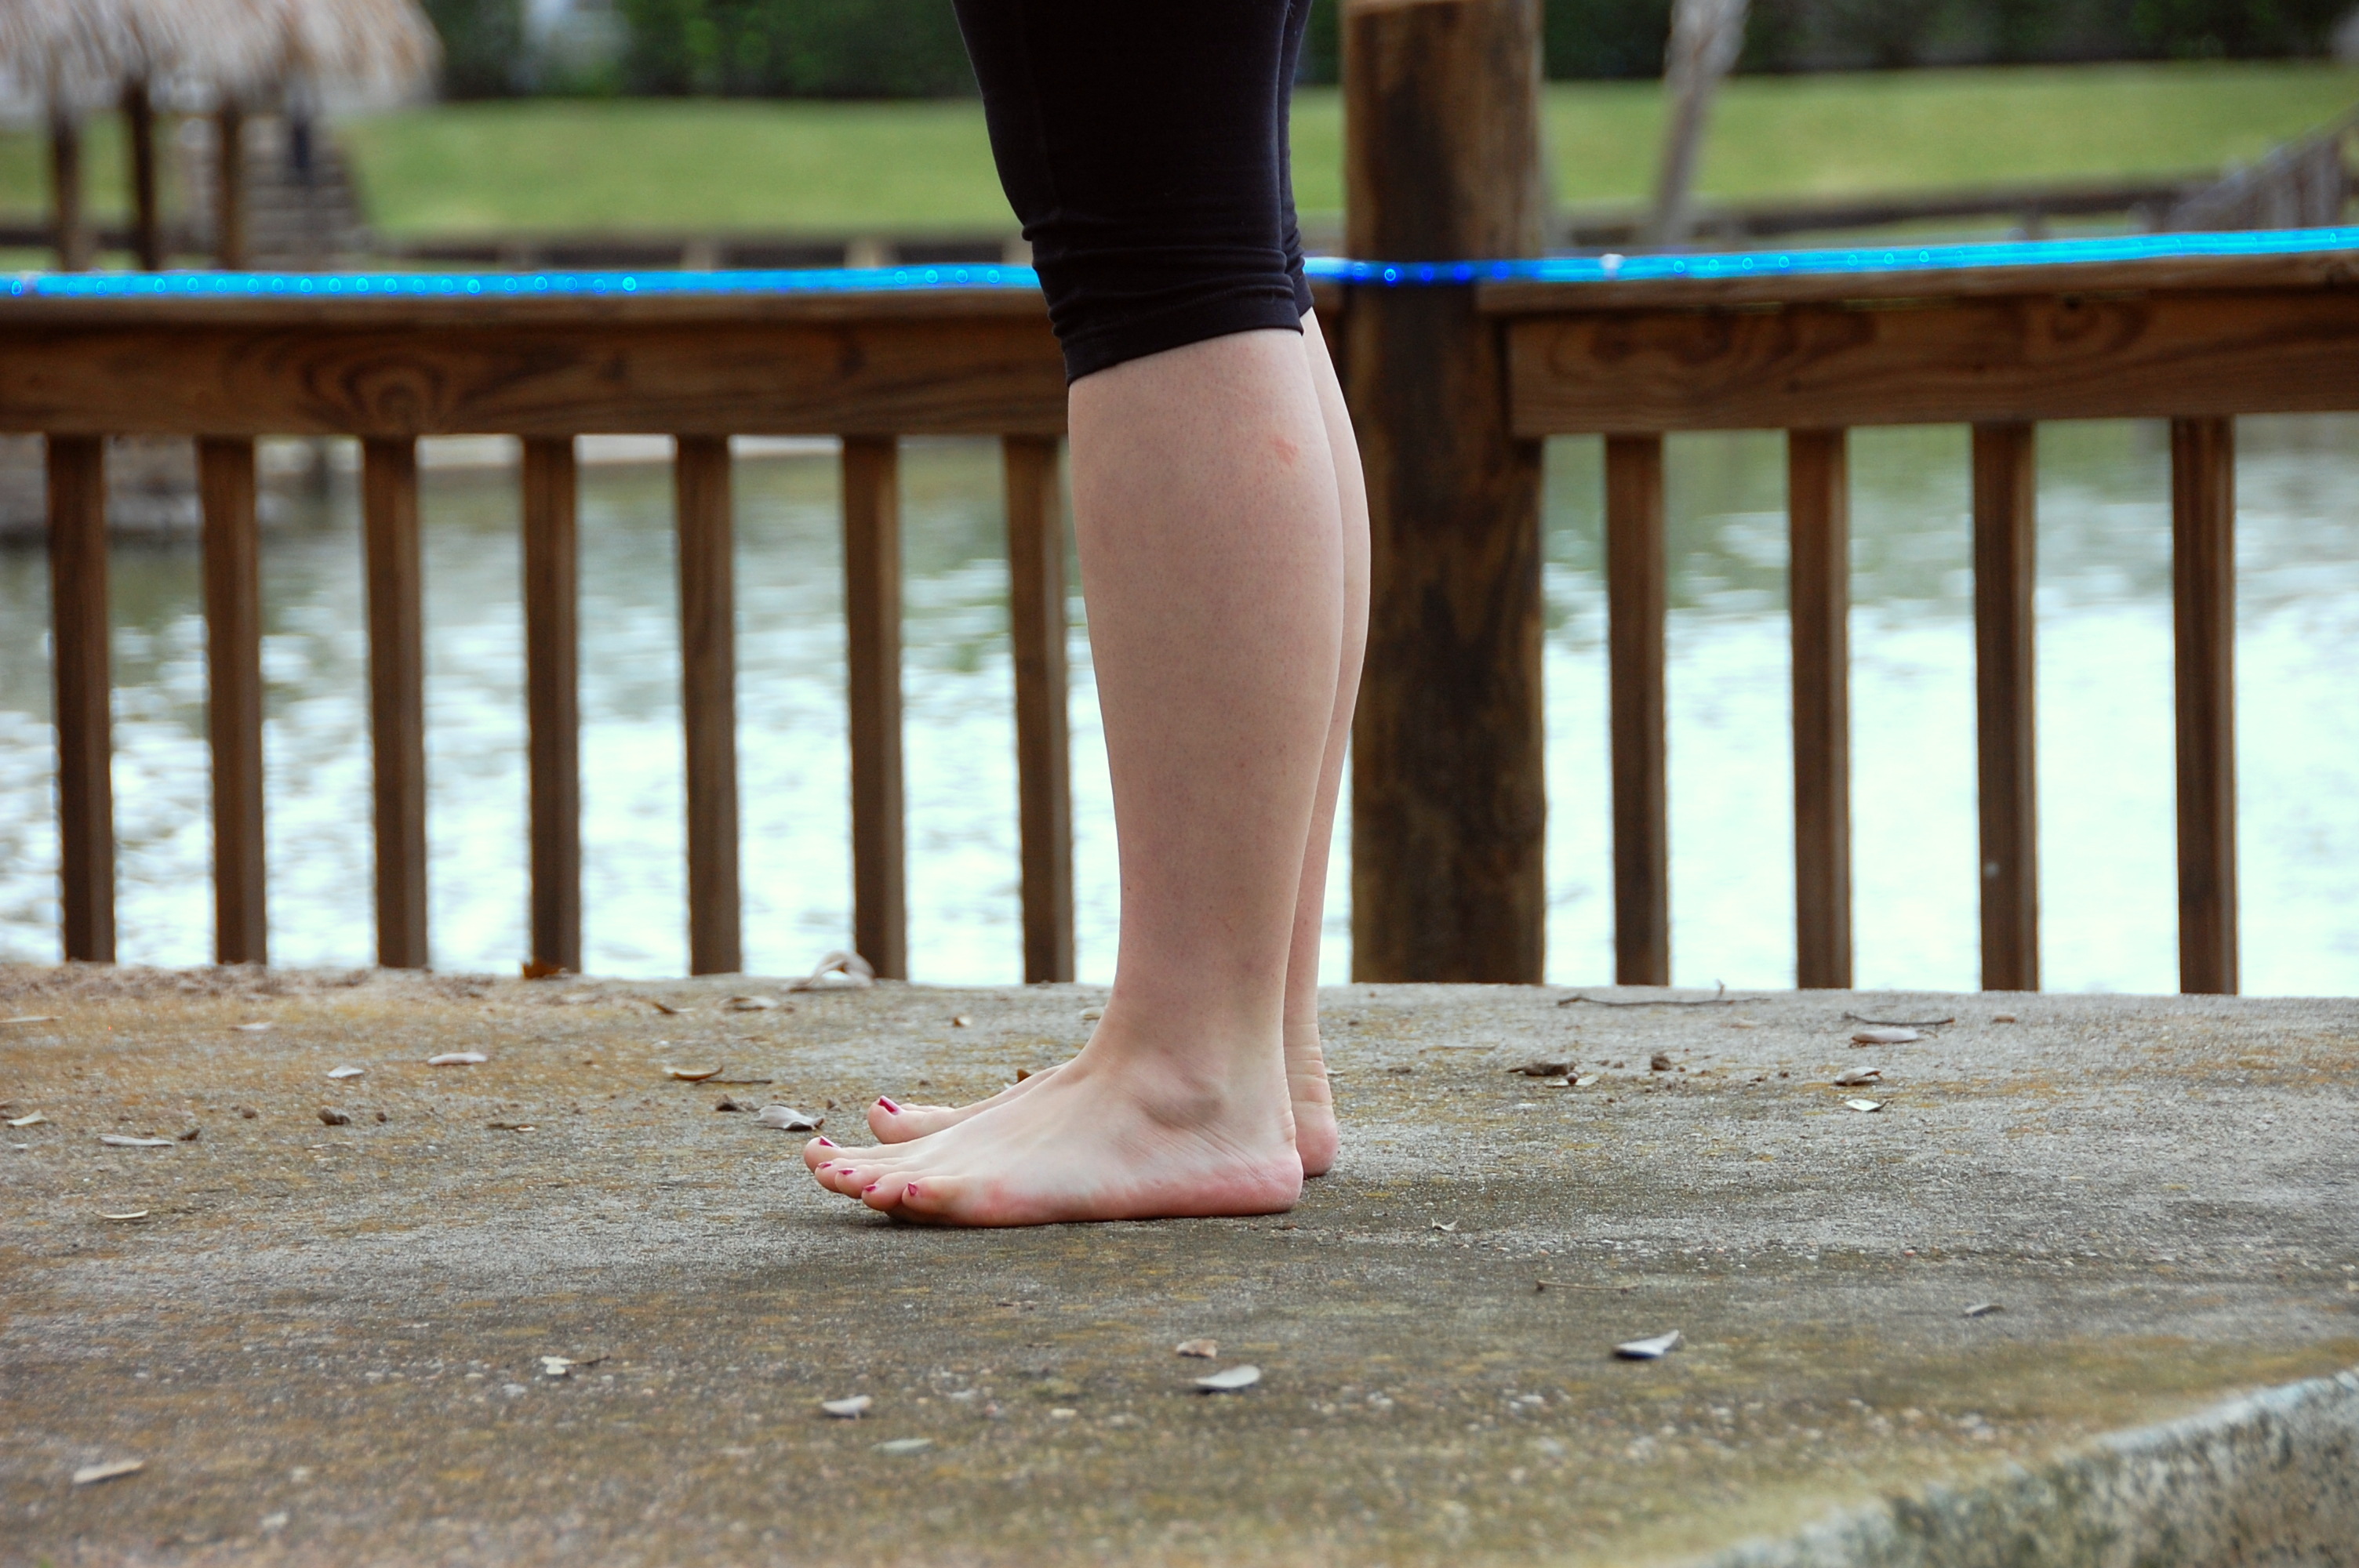 6 Ankle Strengthening Exercises to Prevent and Avoid Further